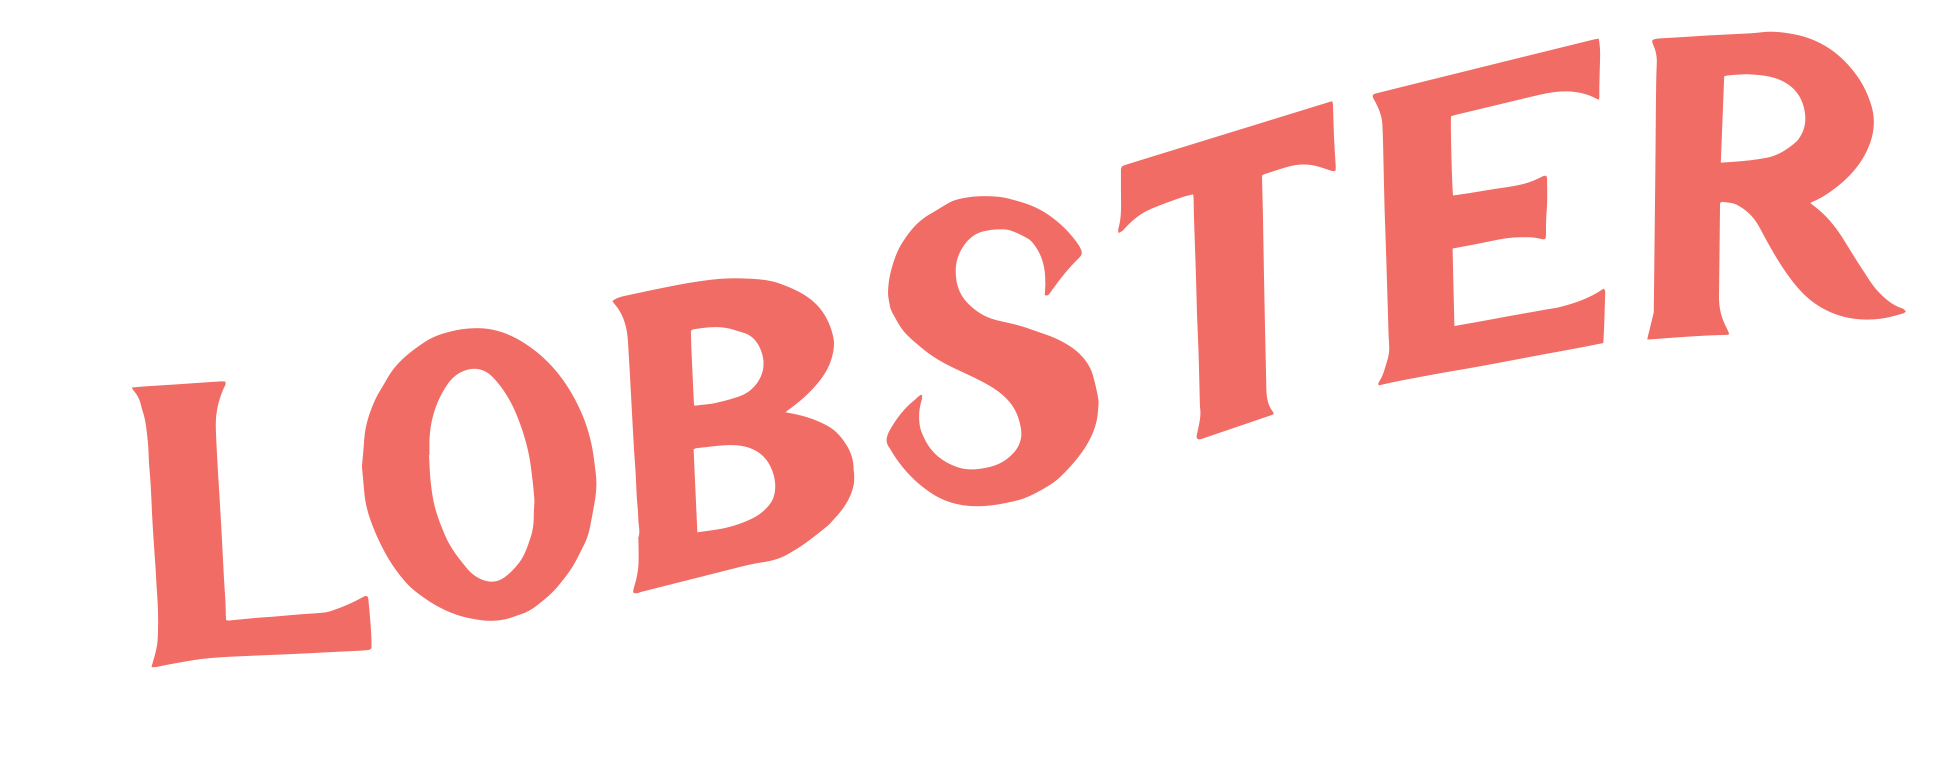 Thelobstershed Logo White